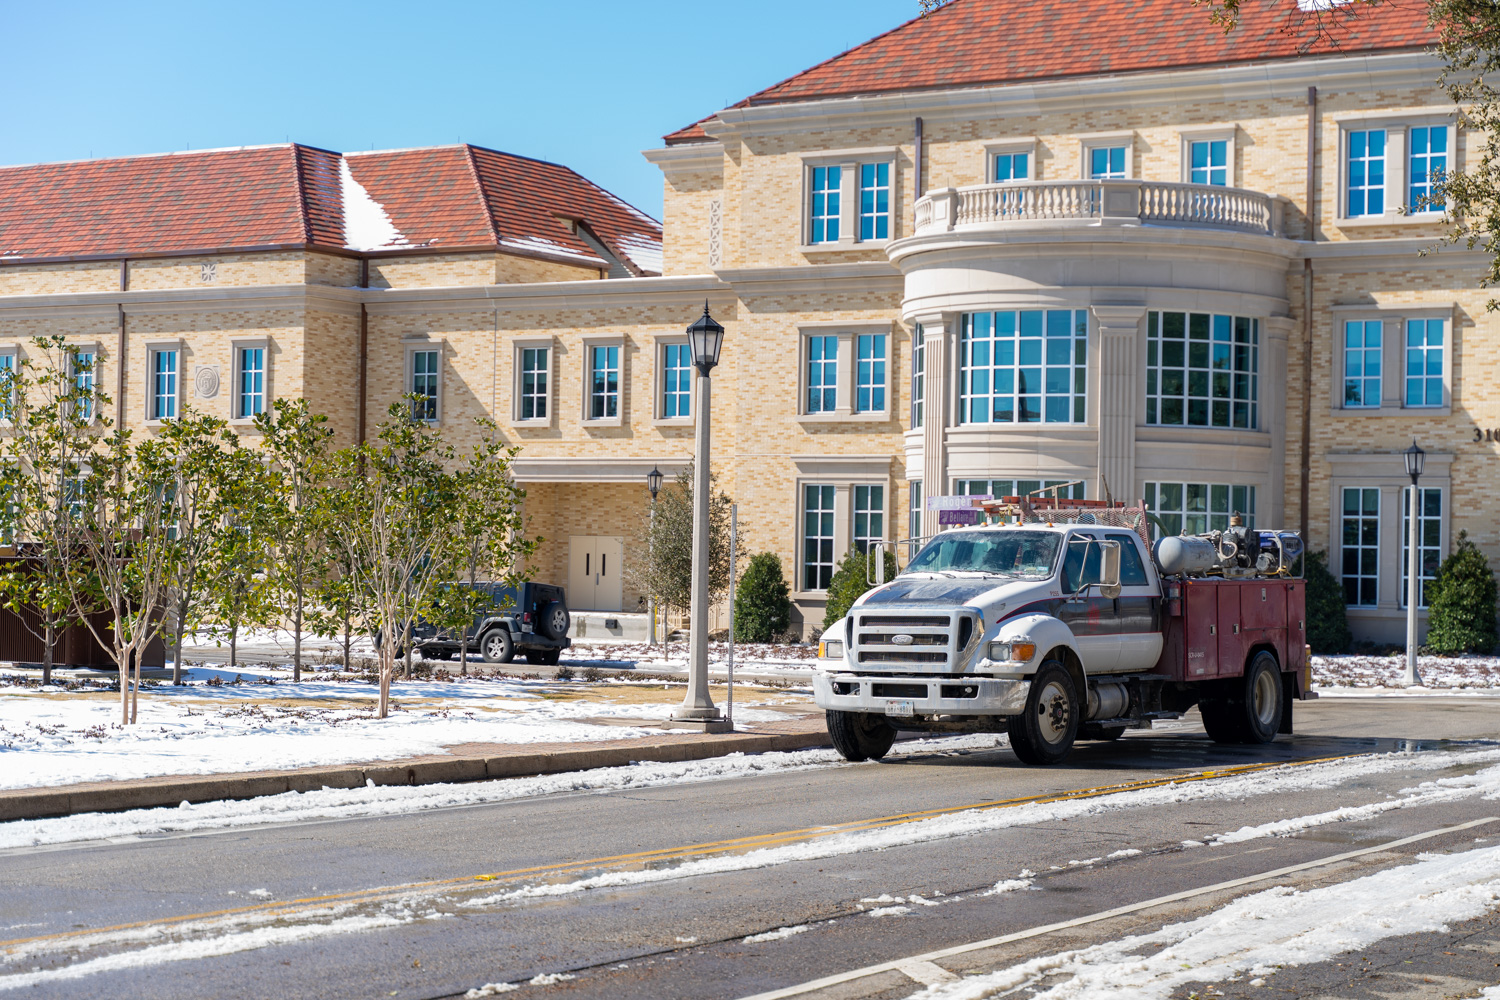 TCU pipes are being repaired during the winter storm